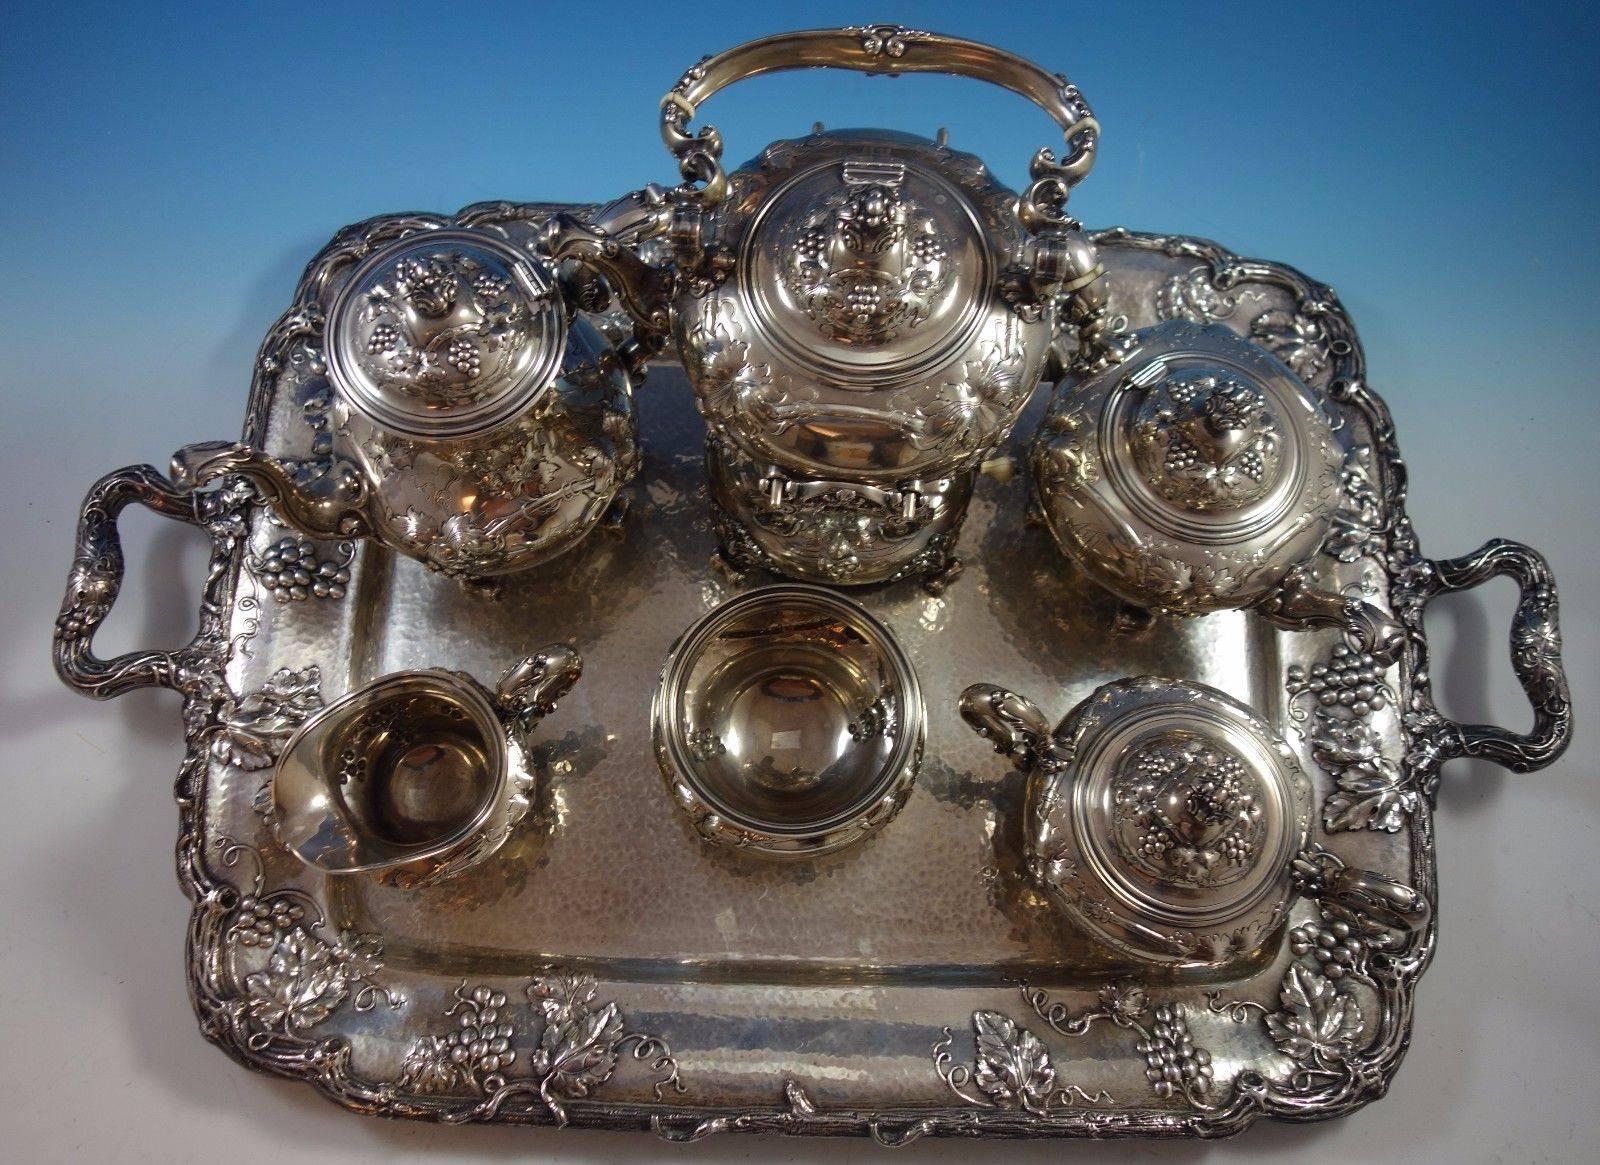 Superb Modernic by Gorham circa 1905 sterling silver six-piece tea set with tray. Incredible set with grapevine and grape motif, fantastic detail throughout. 
All the pieces except for the tray are marked with #1818B, and the tray is marked with